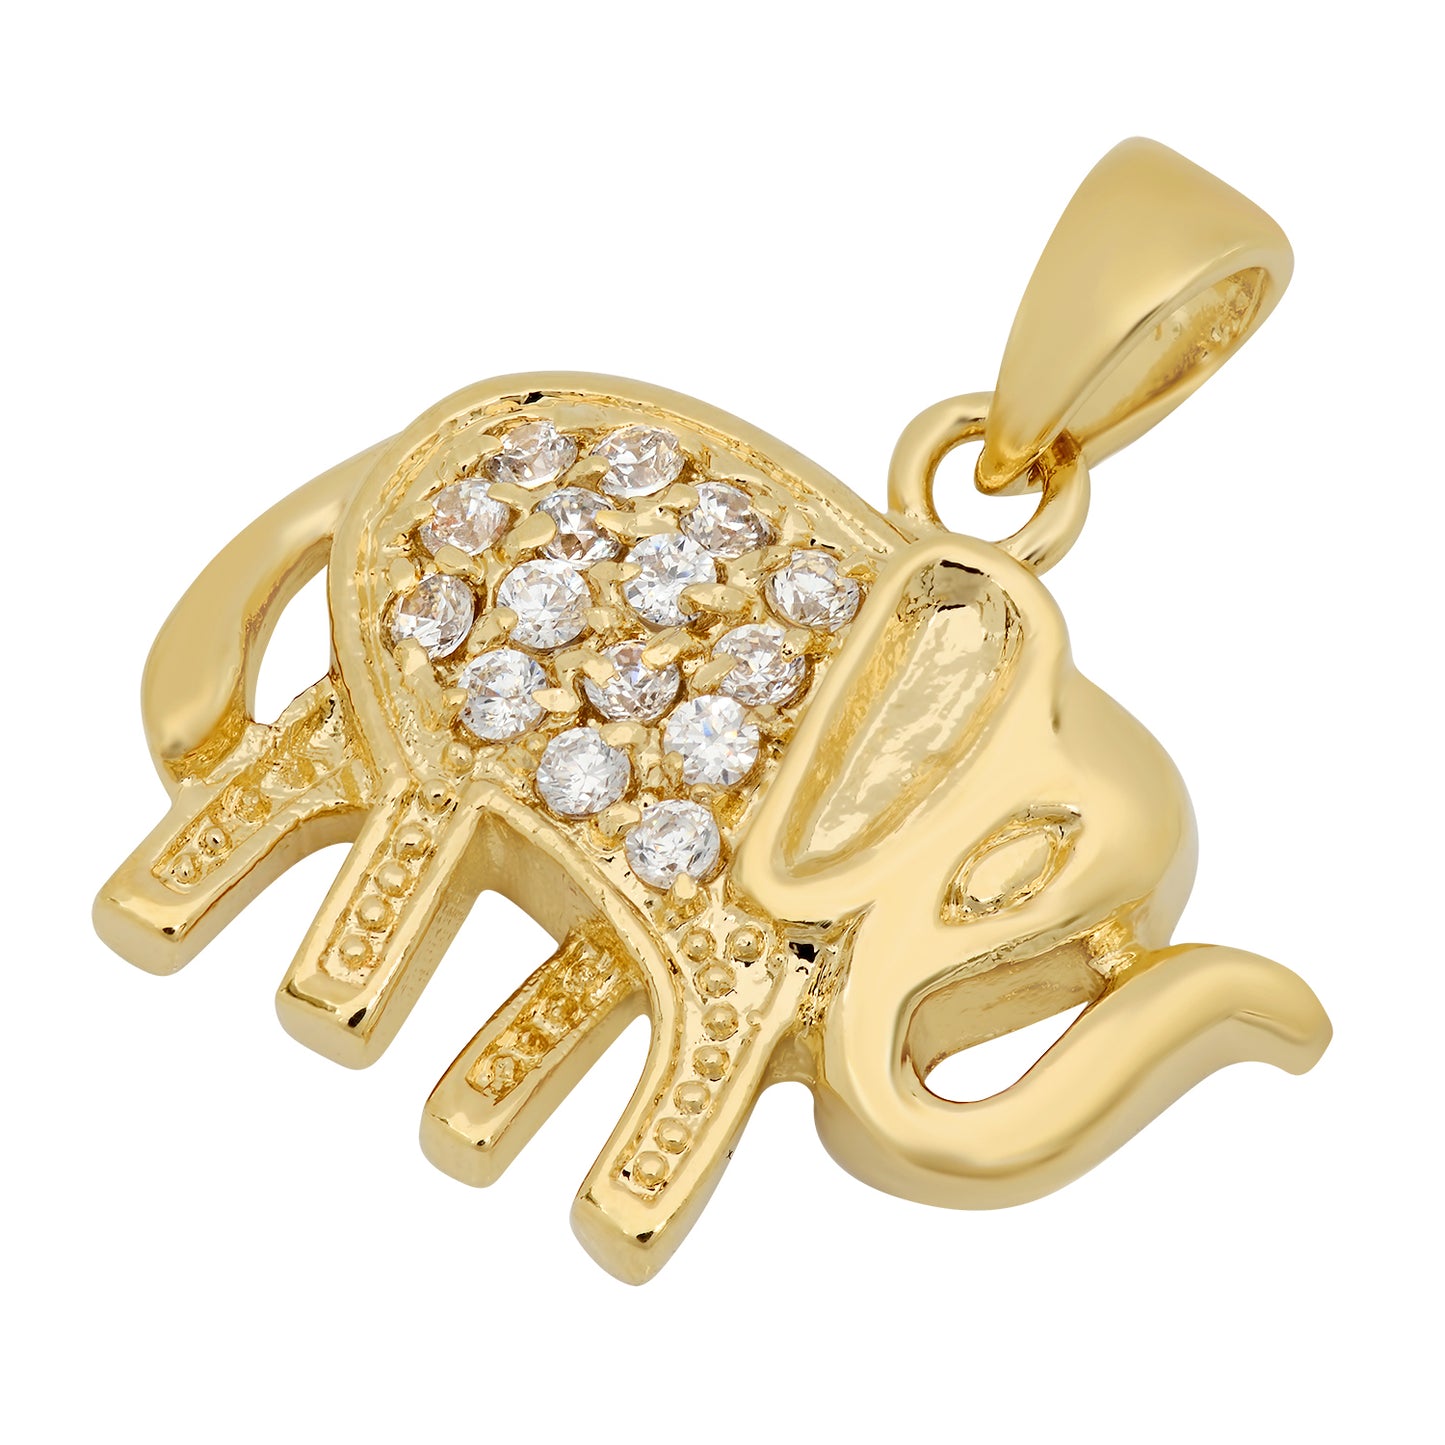 Gold Plated Elephant Pendant Accented w/Round Cubic Zirconia + Jewelry Polishing Cloth (SKU: GL-CZP512-SET)